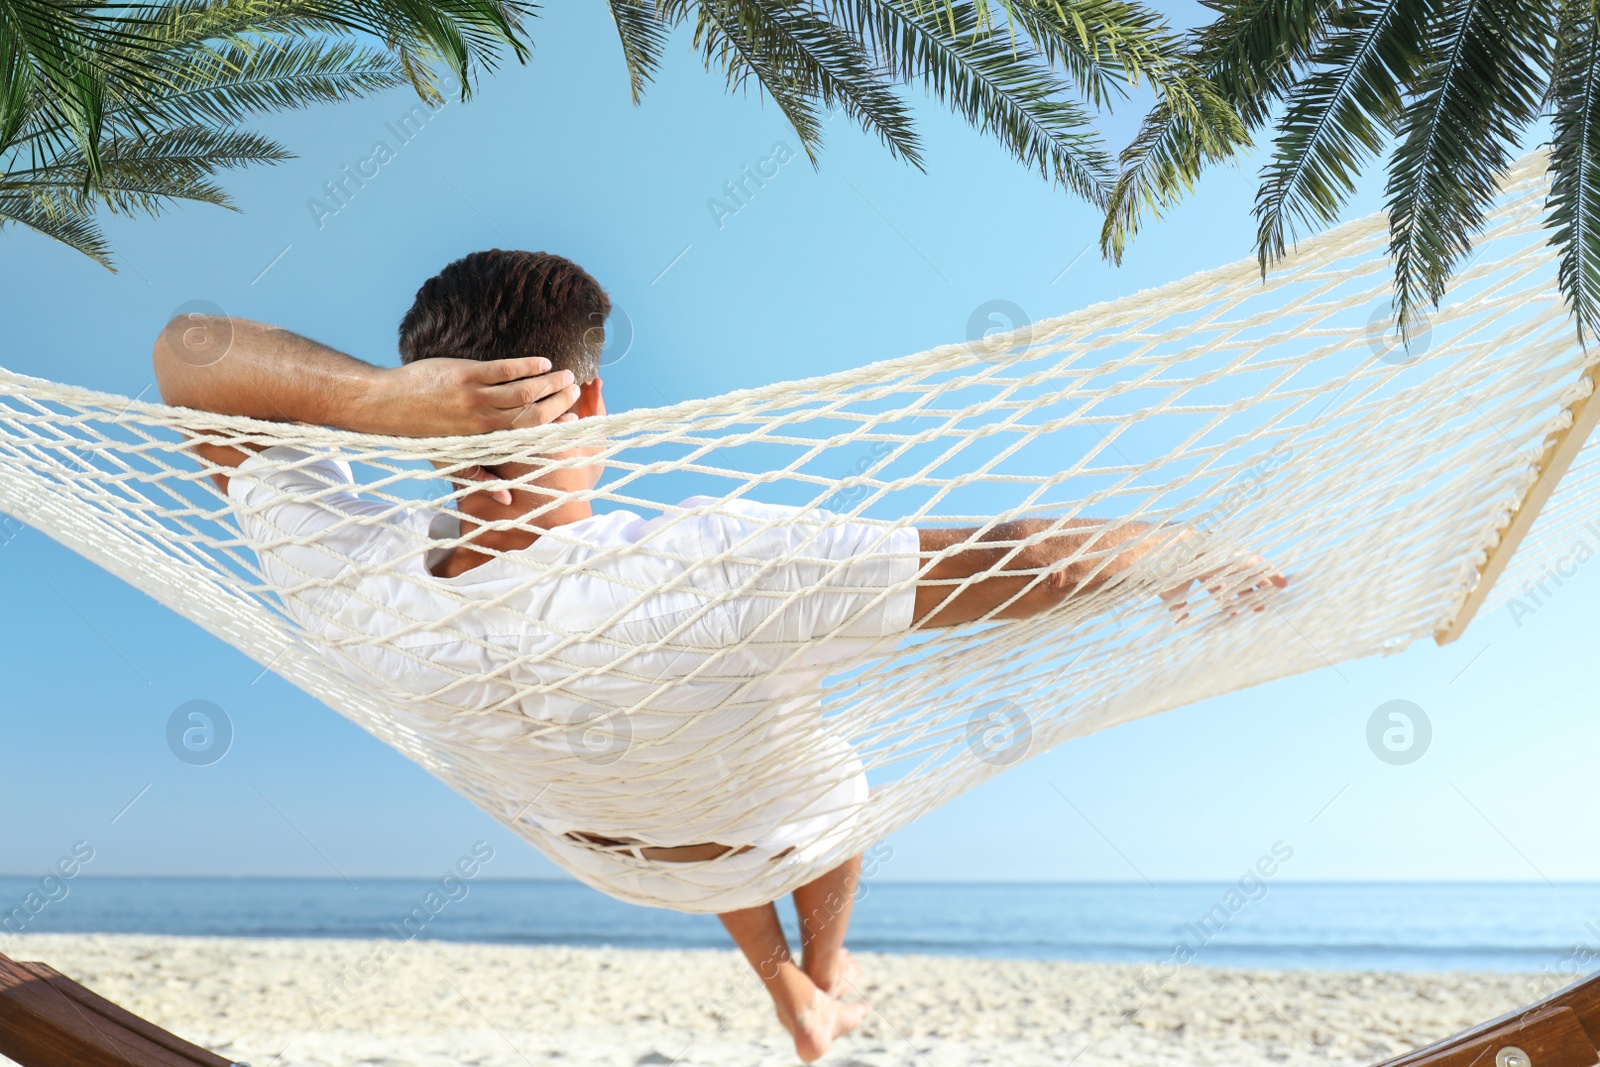 Image of Man relaxing in hammock under green palm leaves on sunlit beach